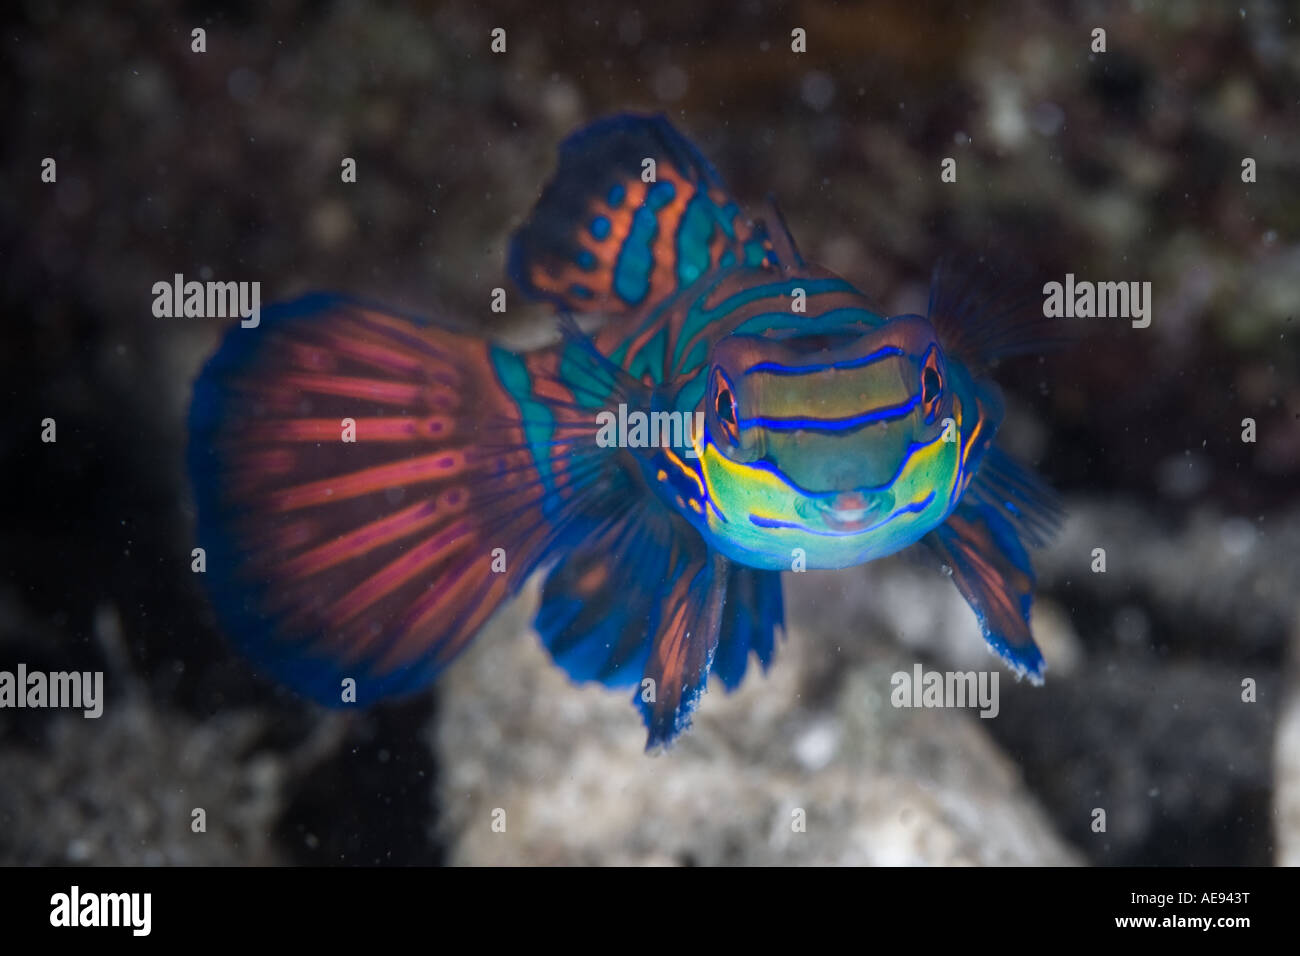 A living jewel, the mandarinfish, Synchiropus splendidus, is a reminder of the beauty underwater in the tropical Pacific. Stock Photo